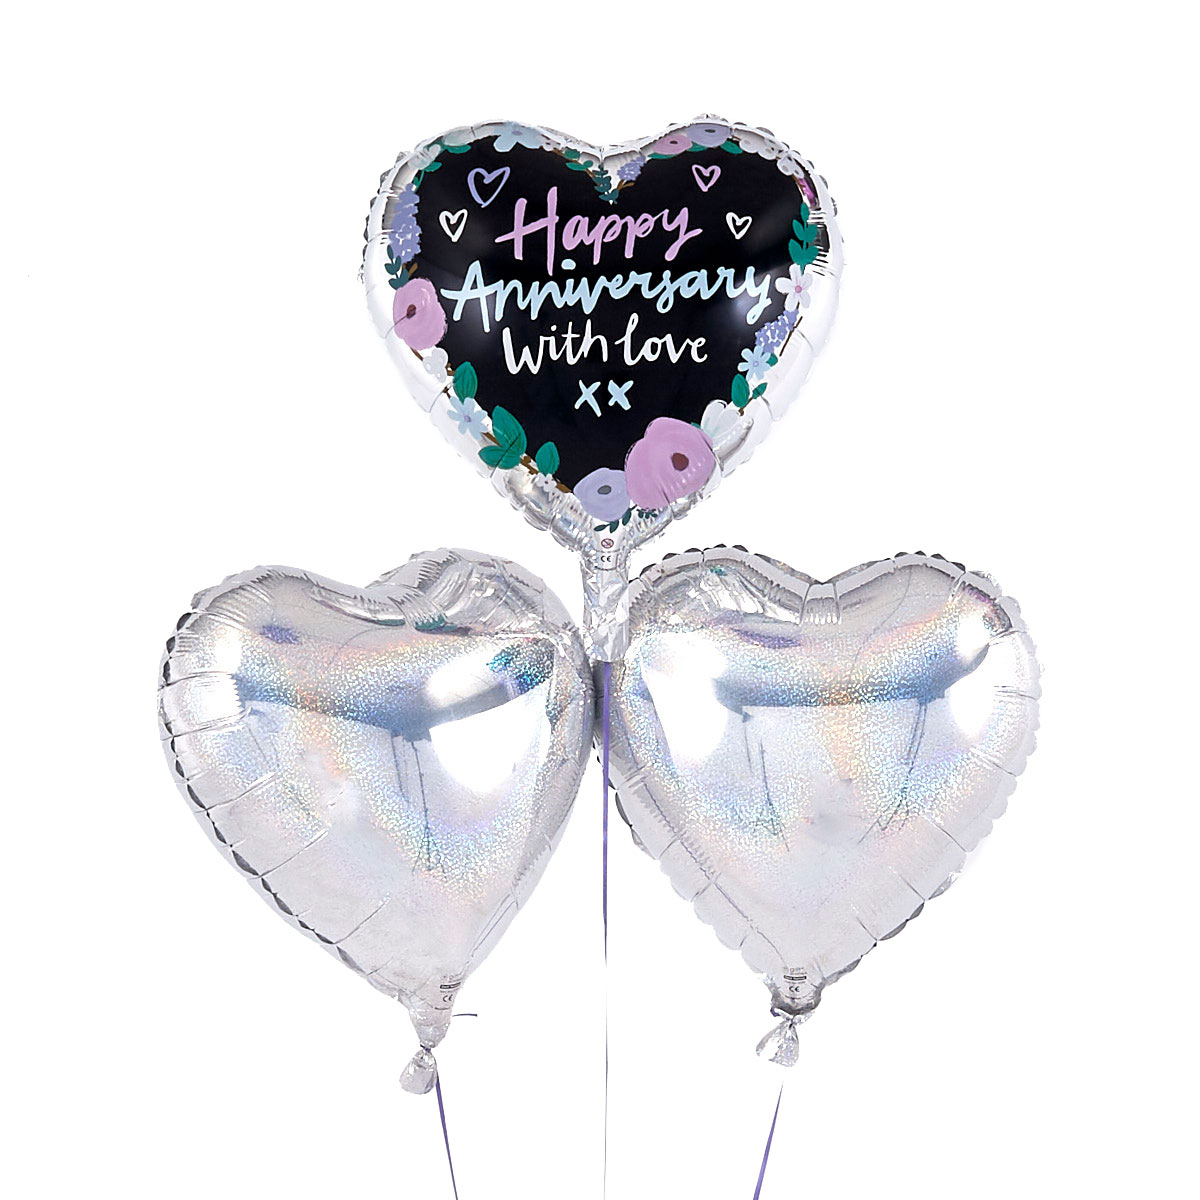 Happy Anniversary Romantic Balloon Bouquet - DELIVERED INFLATED!